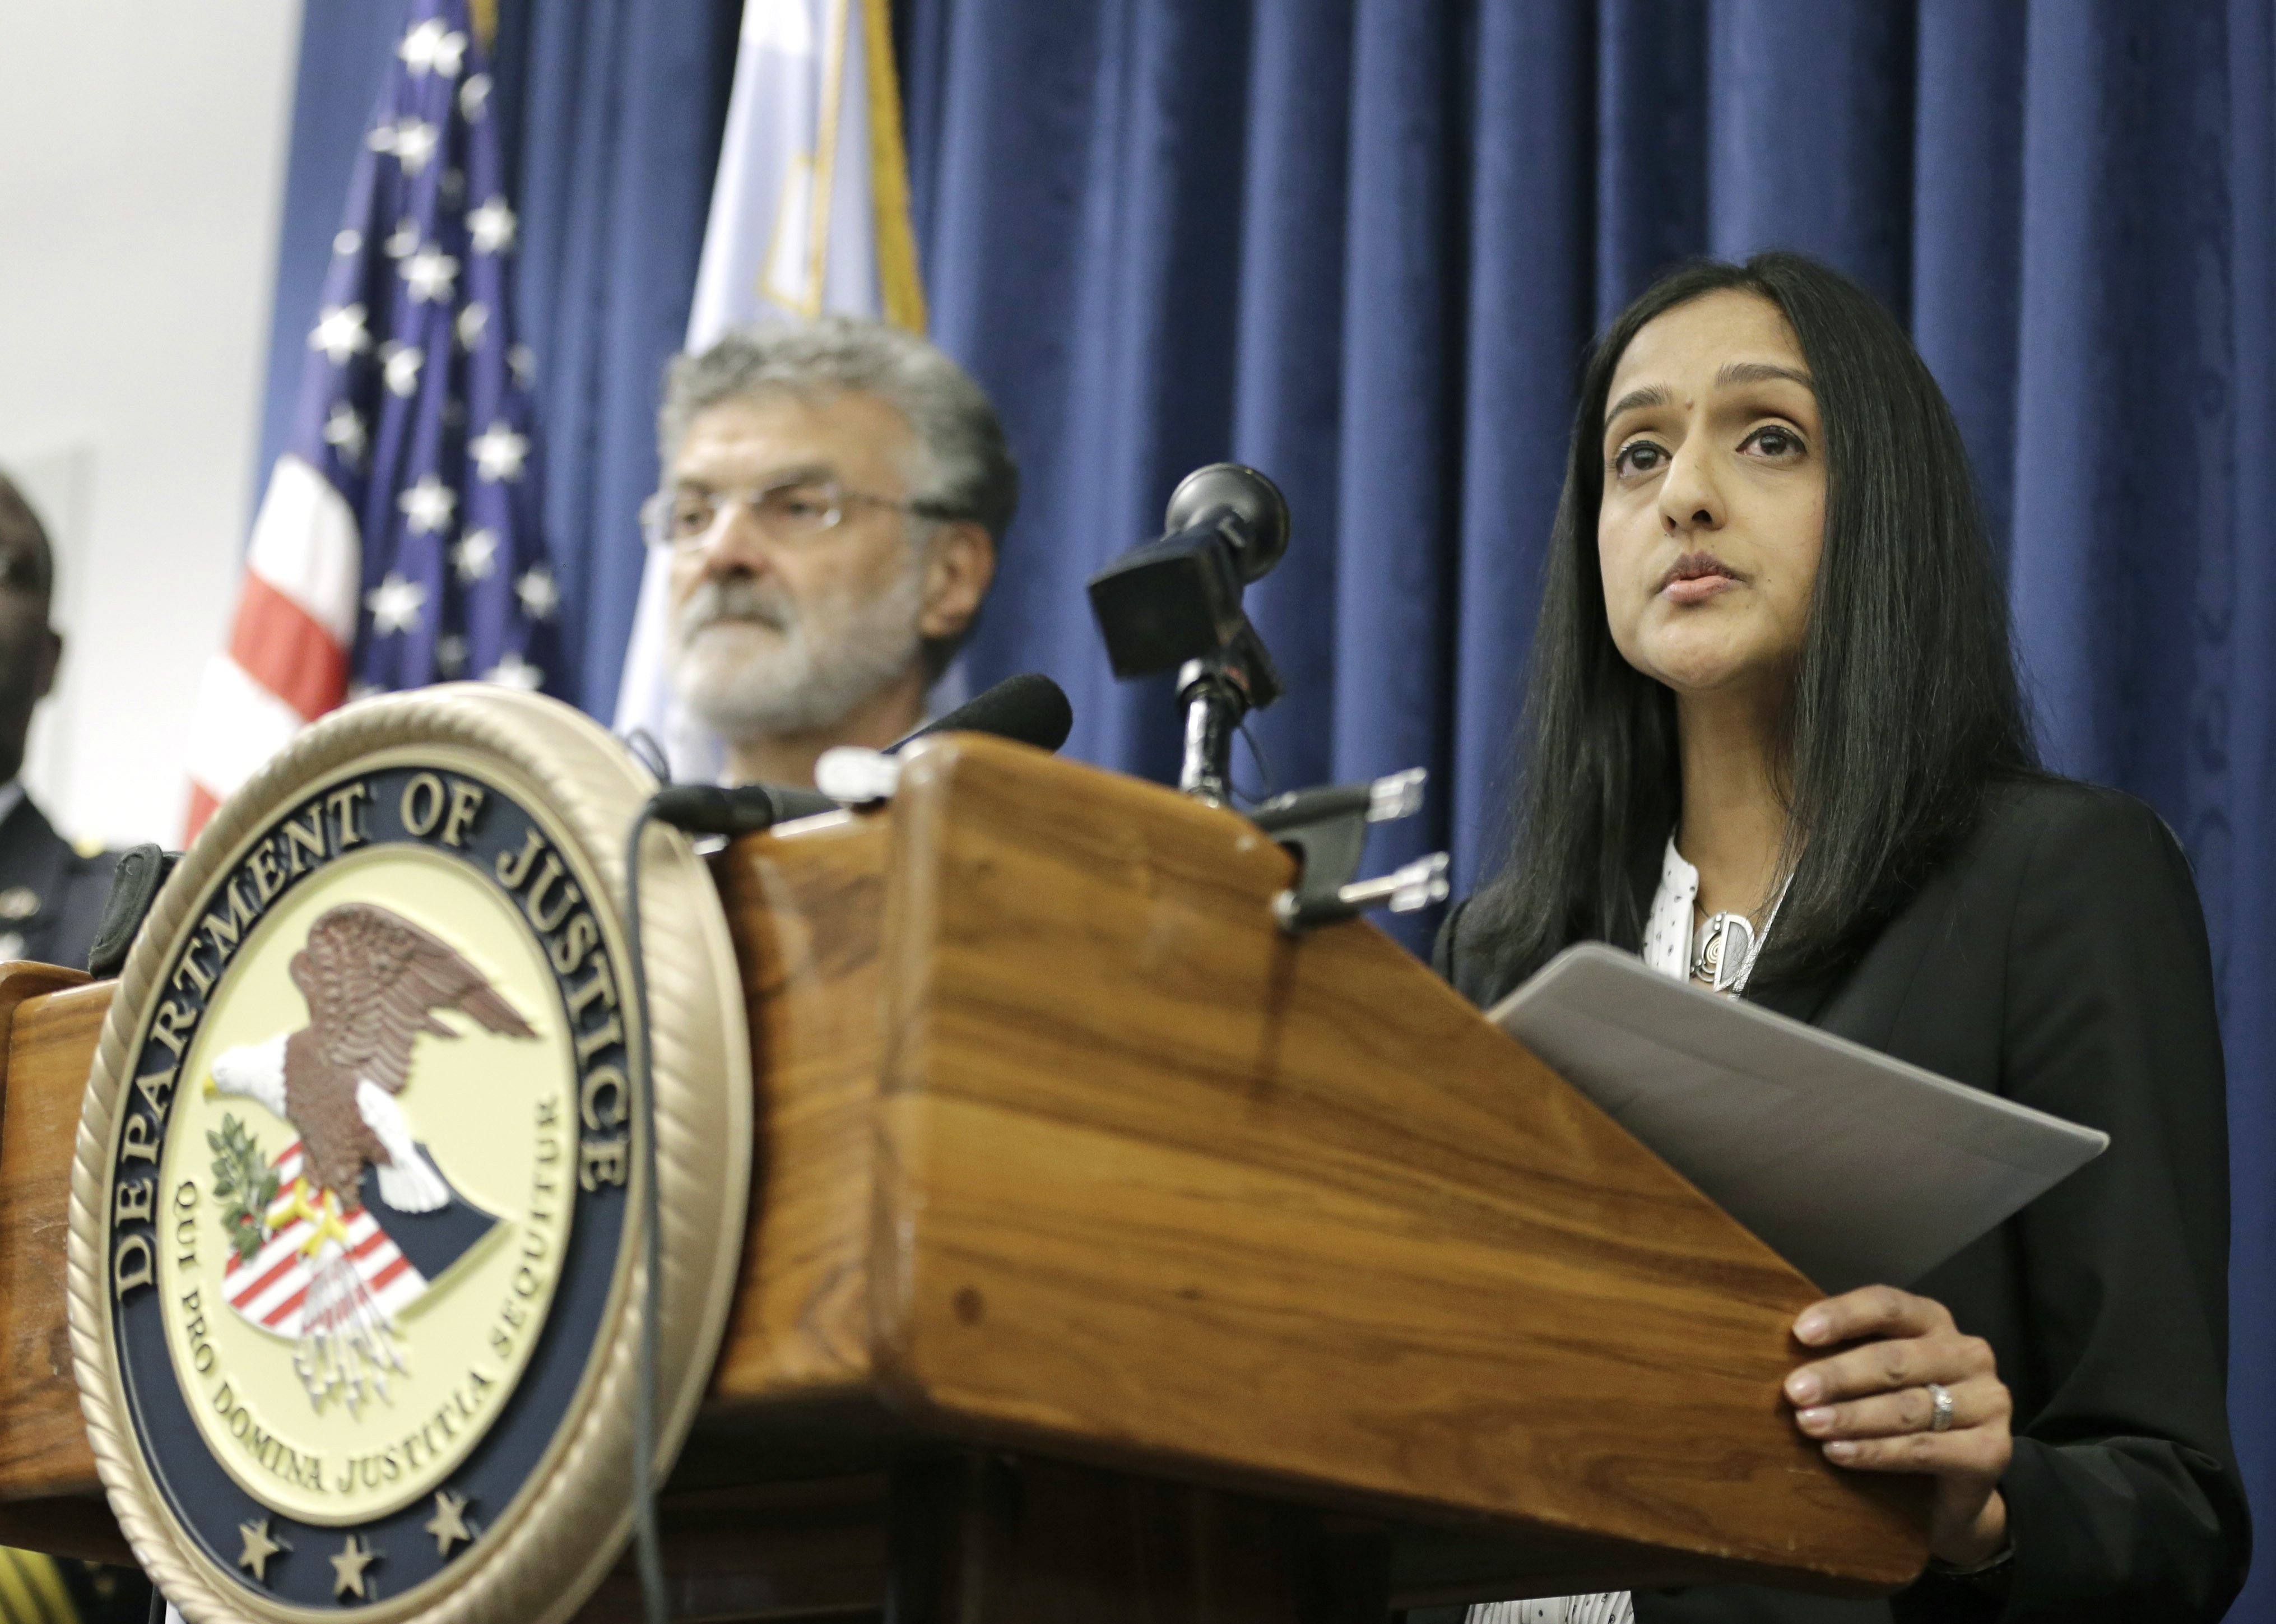 U.S. Acting Assistant Attorney General Vanita Gupta for the Civil Rights Division, right, makes a statement during a news conference on Dec. 4, 2014, in Cleveland. (Tony Dejak—AP)